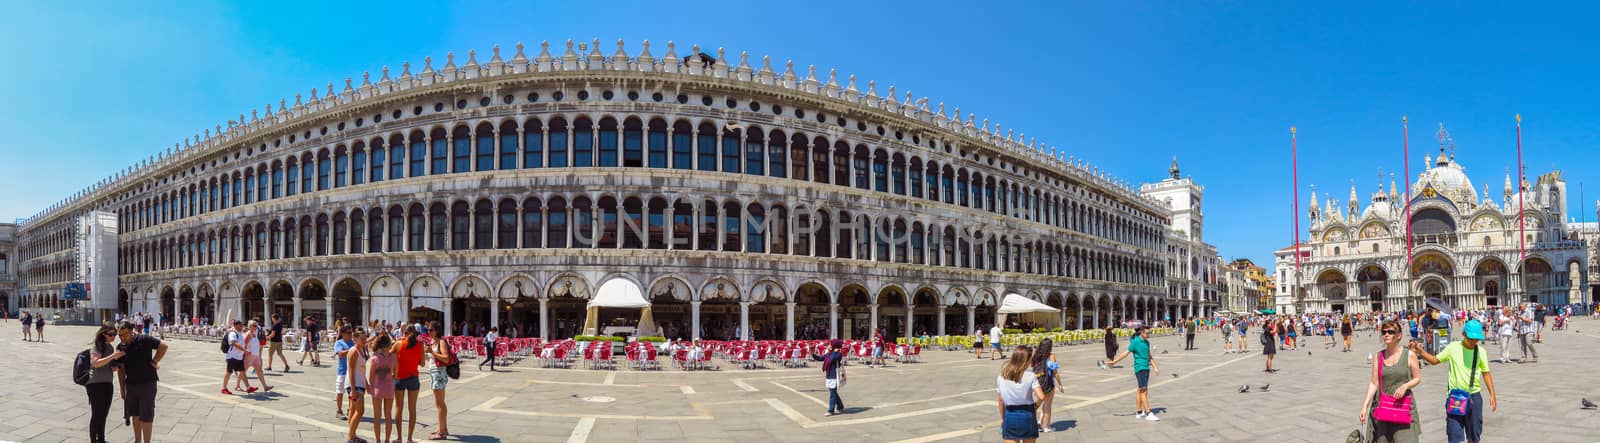 Venice, Italy - June 20, 2017: Panoramic view of a San Marco square in Venice, Italy. Thousands of tourists every month visit St Mark's Square.